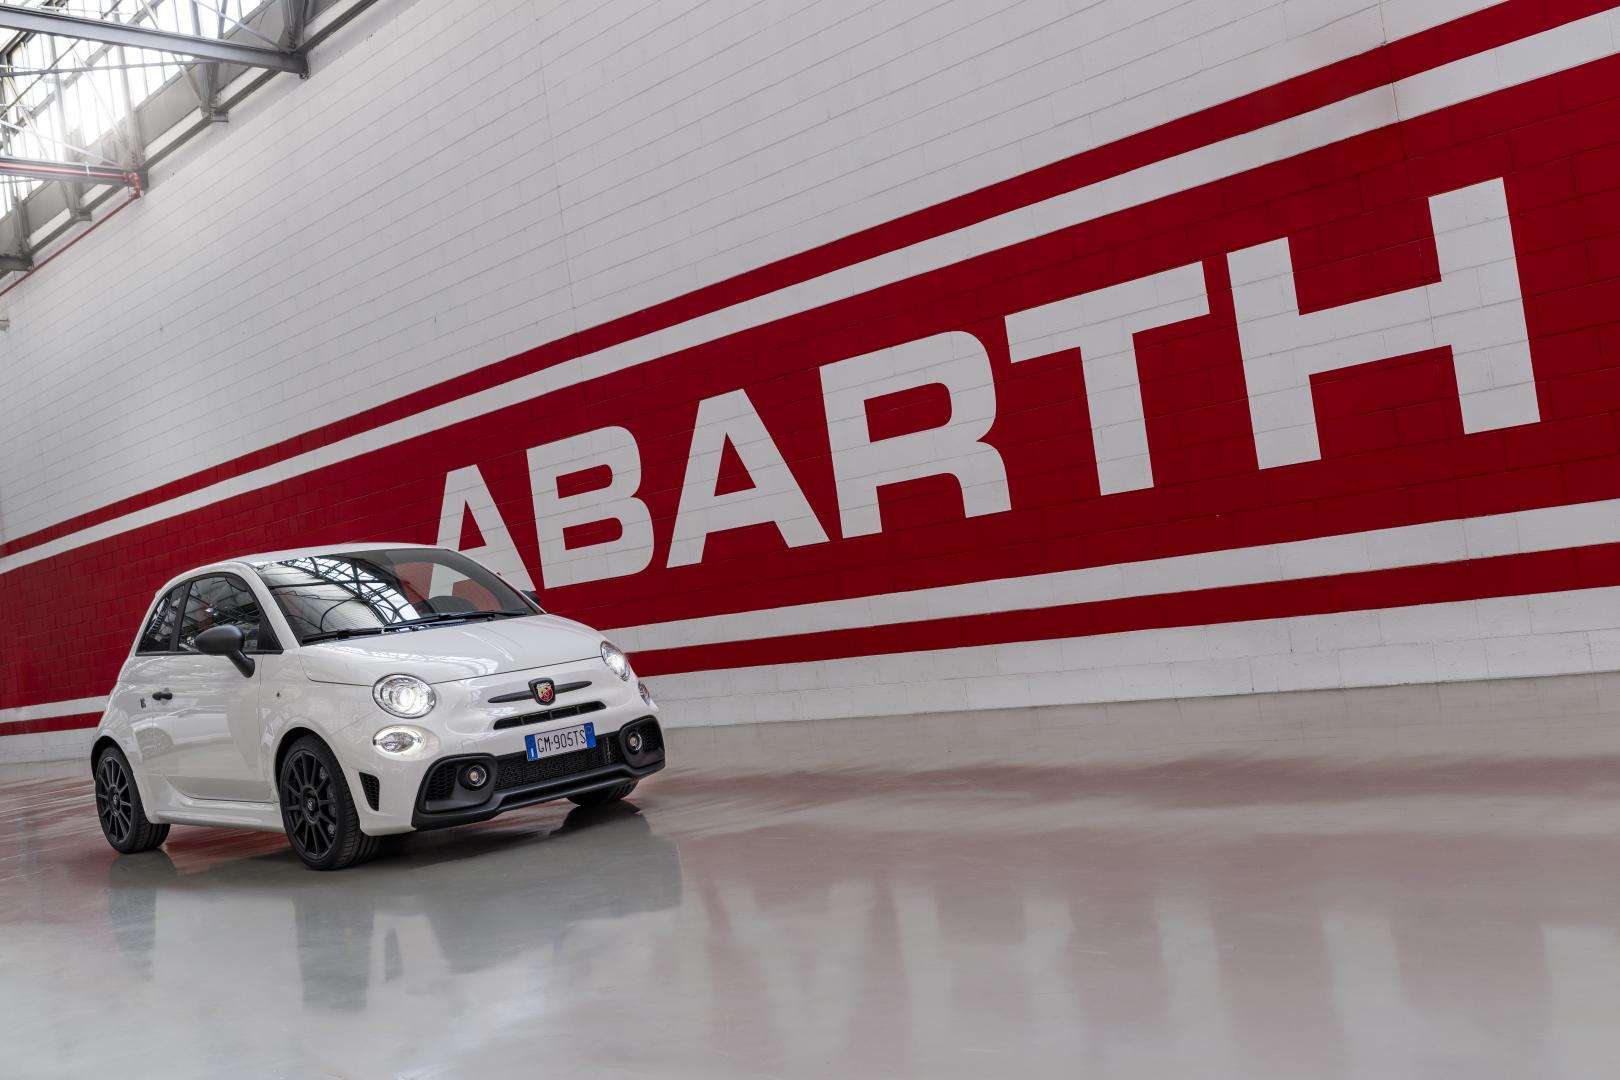 The history of Abarth: a journey through the evolution of performance motoring